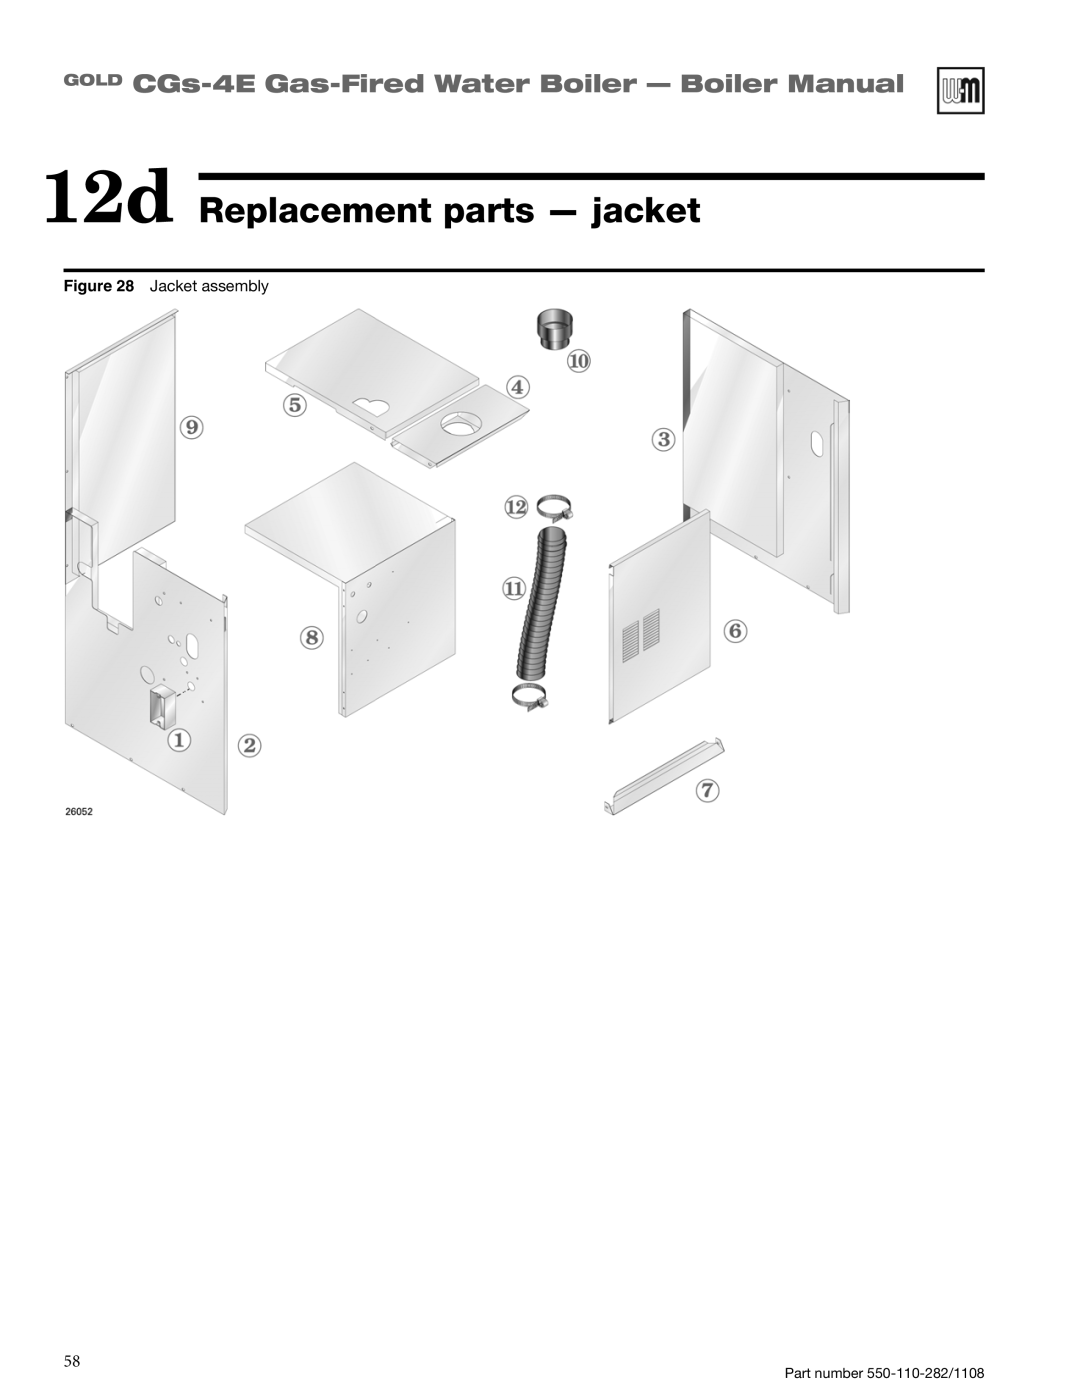 Weil-McLain CGS-4E 12d Replacement parts - jacket, GOLD CGs-4E Gas-FiredWater Boiler - Boiler Manual, Jacket assembly 